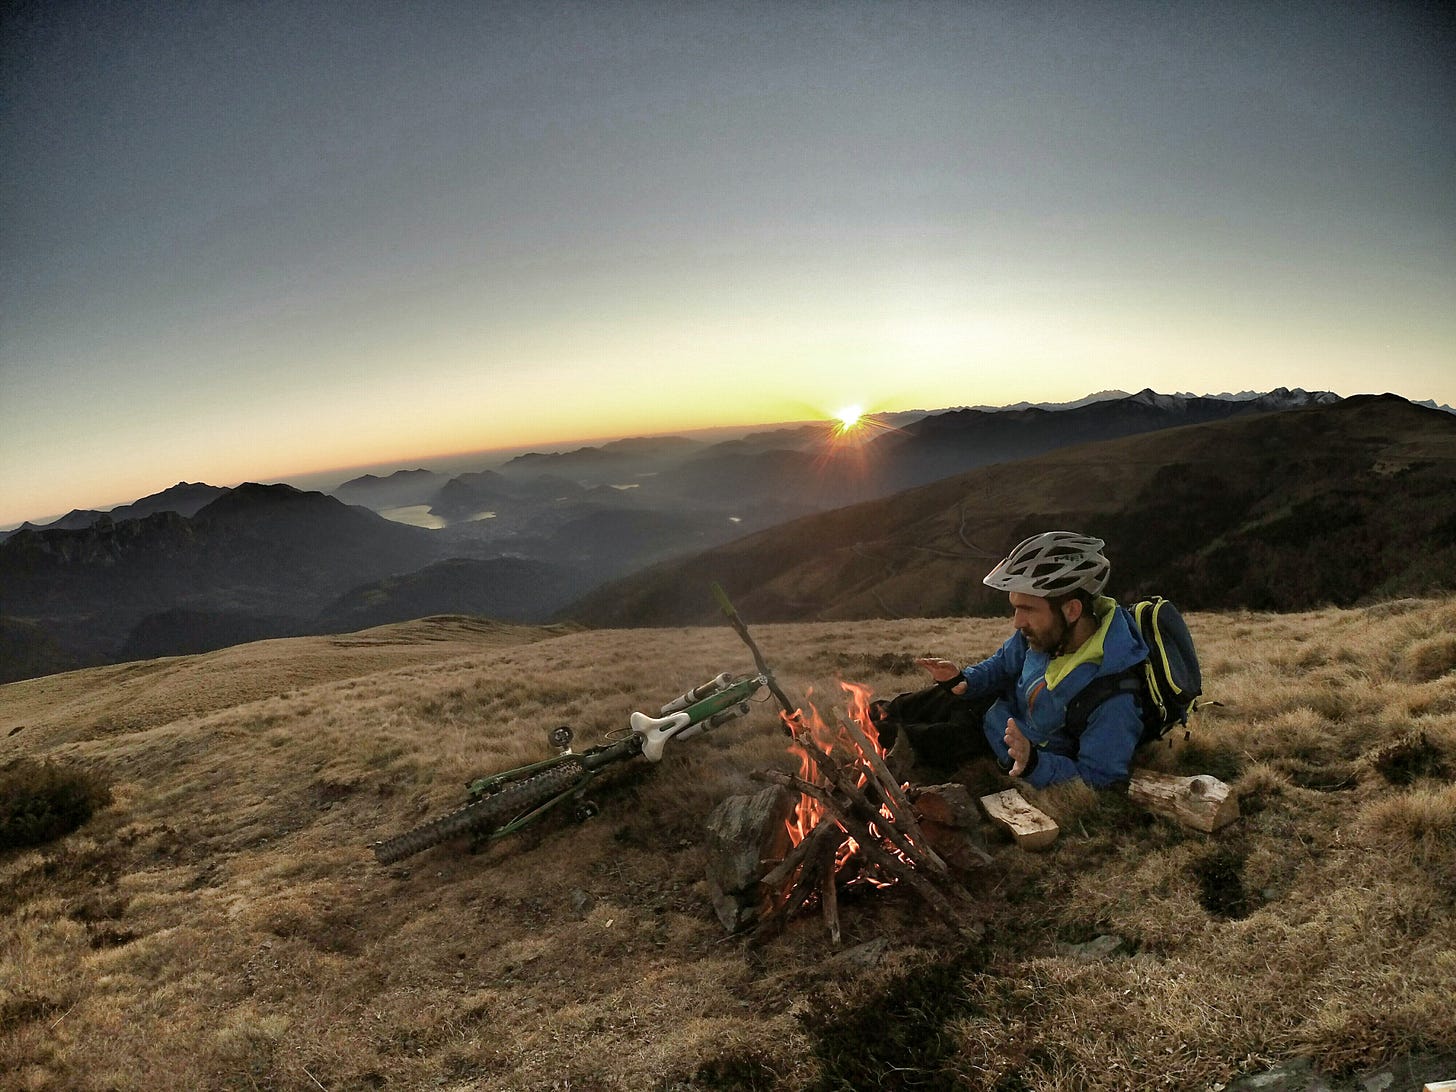 Biker by a campfire in the middle of the wilderness